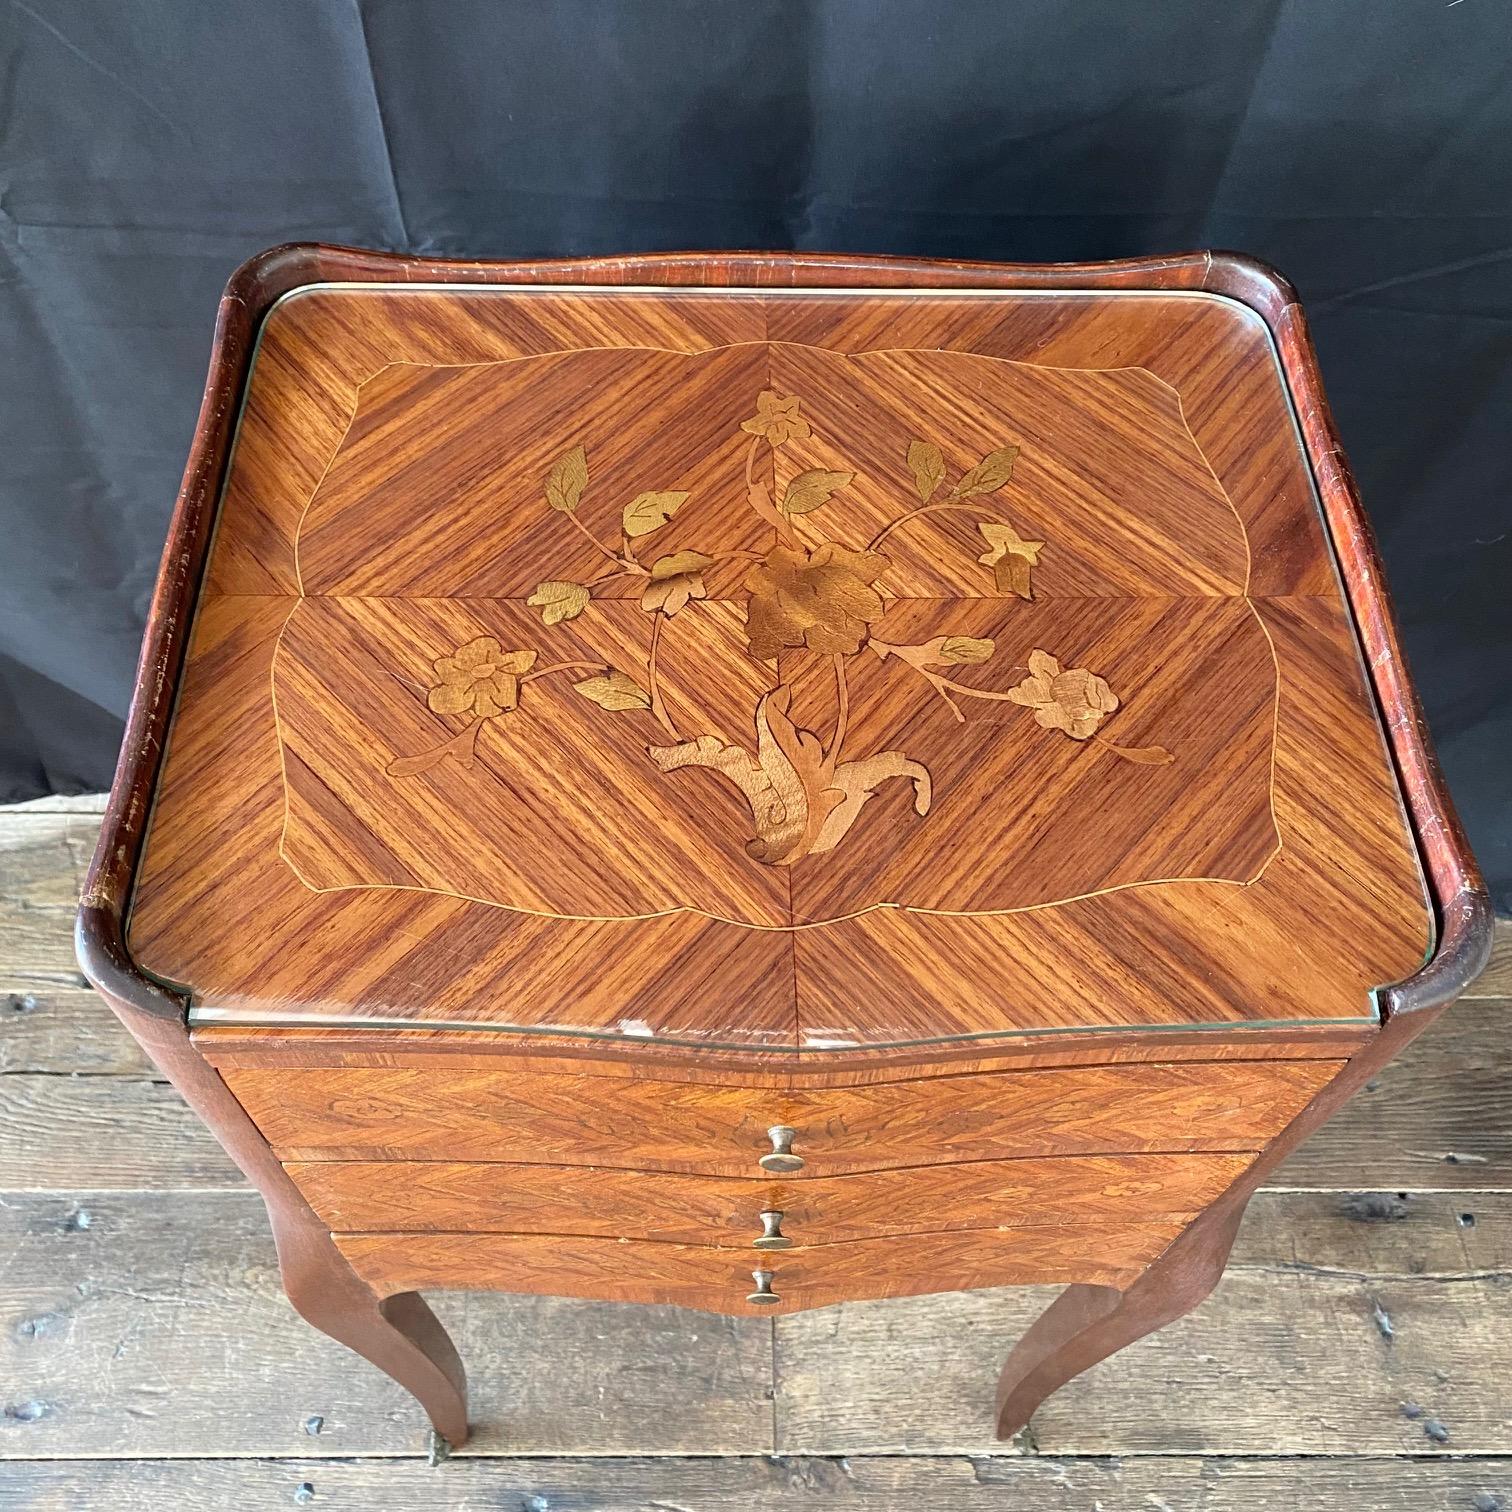 Pair of lovely antique French Louis XV inlaid night stands, bedside tables or side tables with intricate marquetry in the classic Louis XV style. The subtle contours and scroll forms are evident in the cornerposts and legs, supporting serpentine